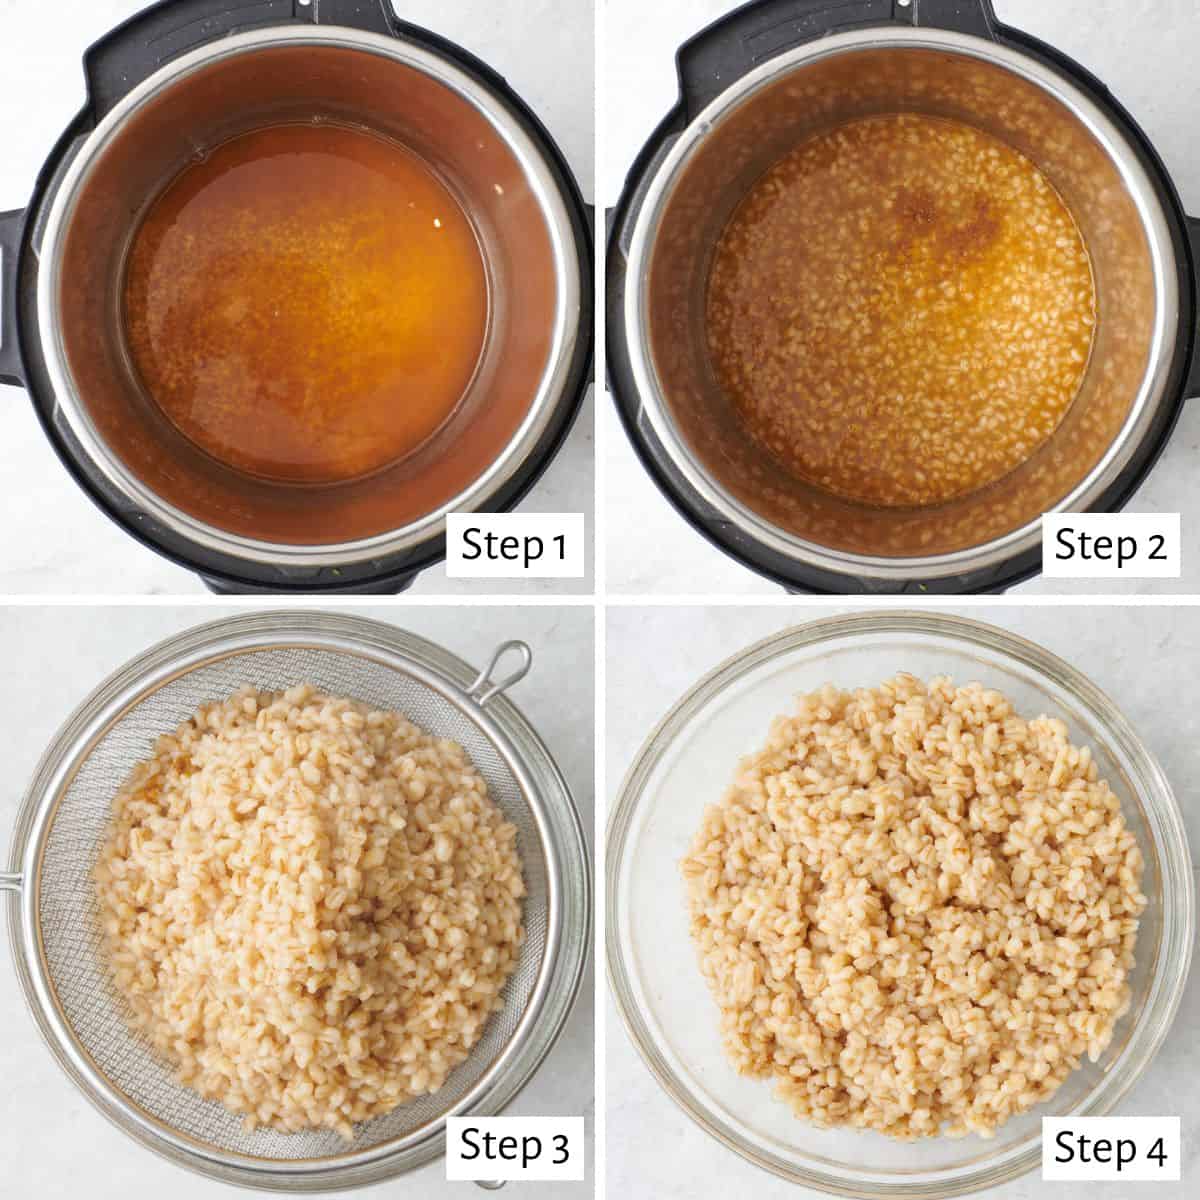 4 image collage making recipe in an instant pot: 1- broth added, 2- barley and salt added, 3- straining barley in a fine mesh sieve, 4- fluffy barley in a bowl.